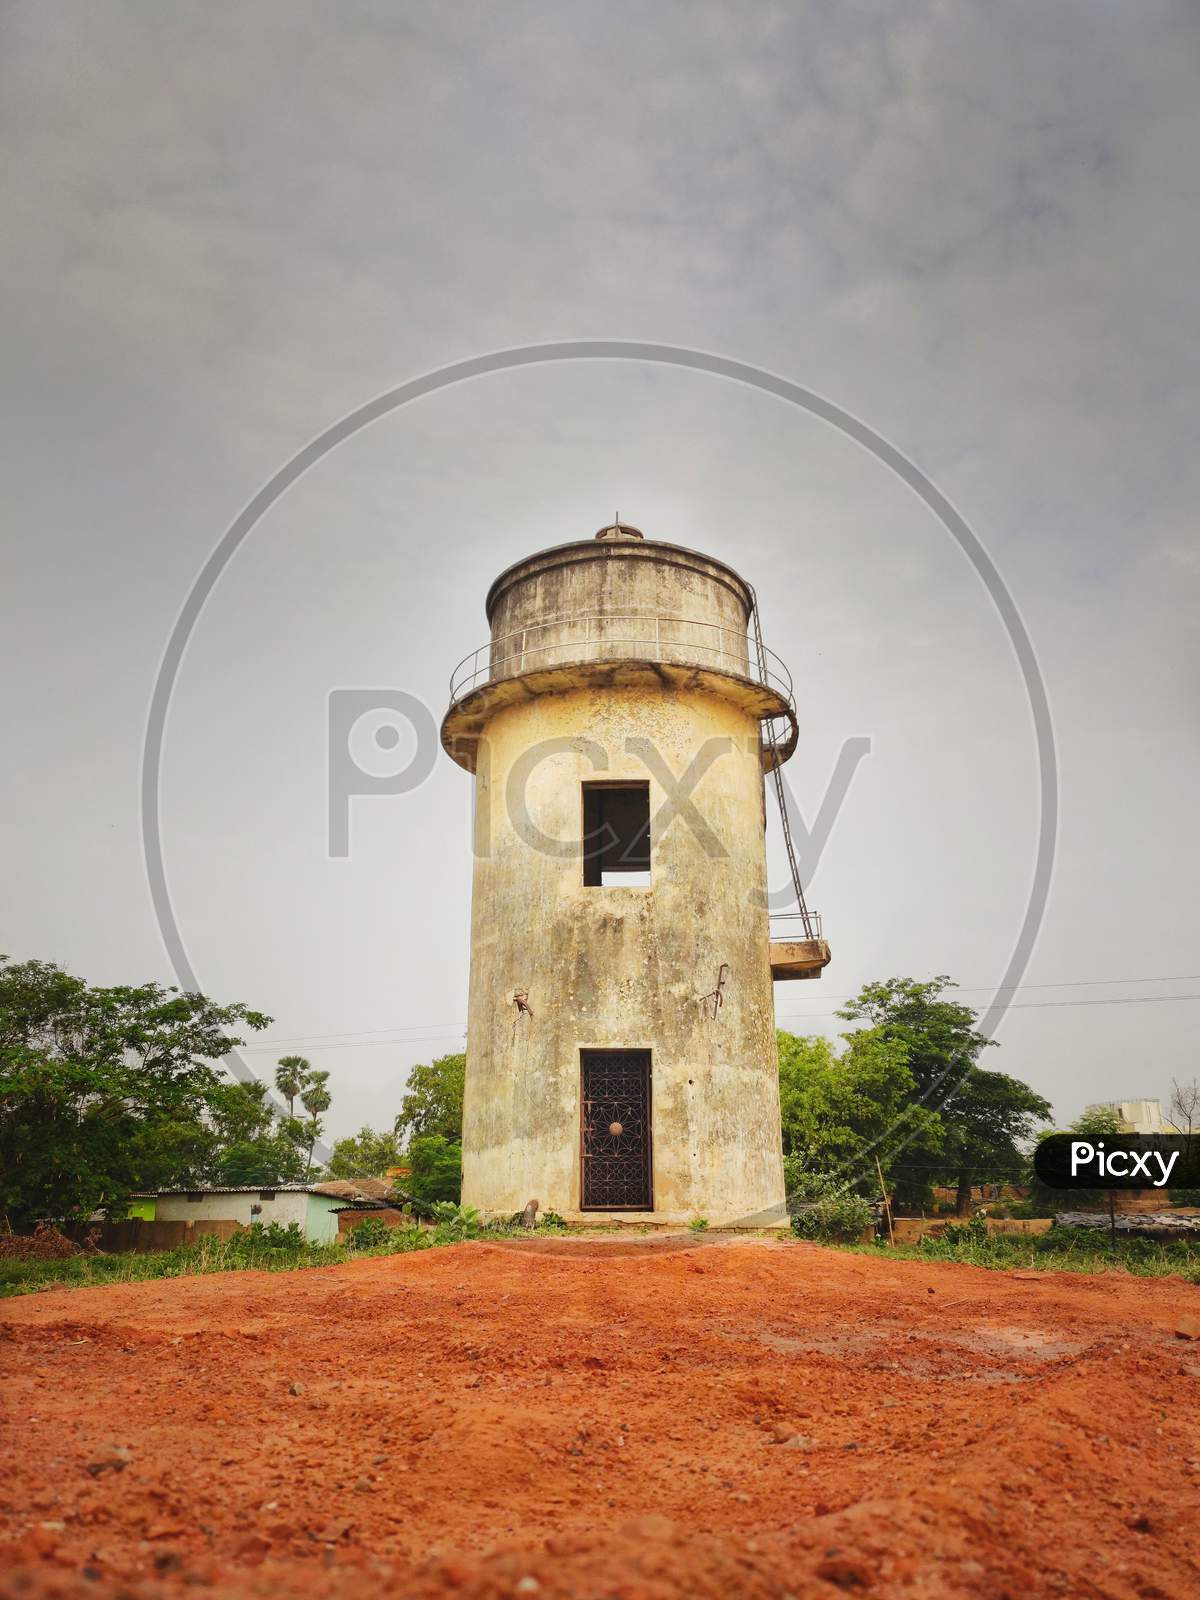 image-of-old-structure-of-government-water-tank-gu240628-picxy